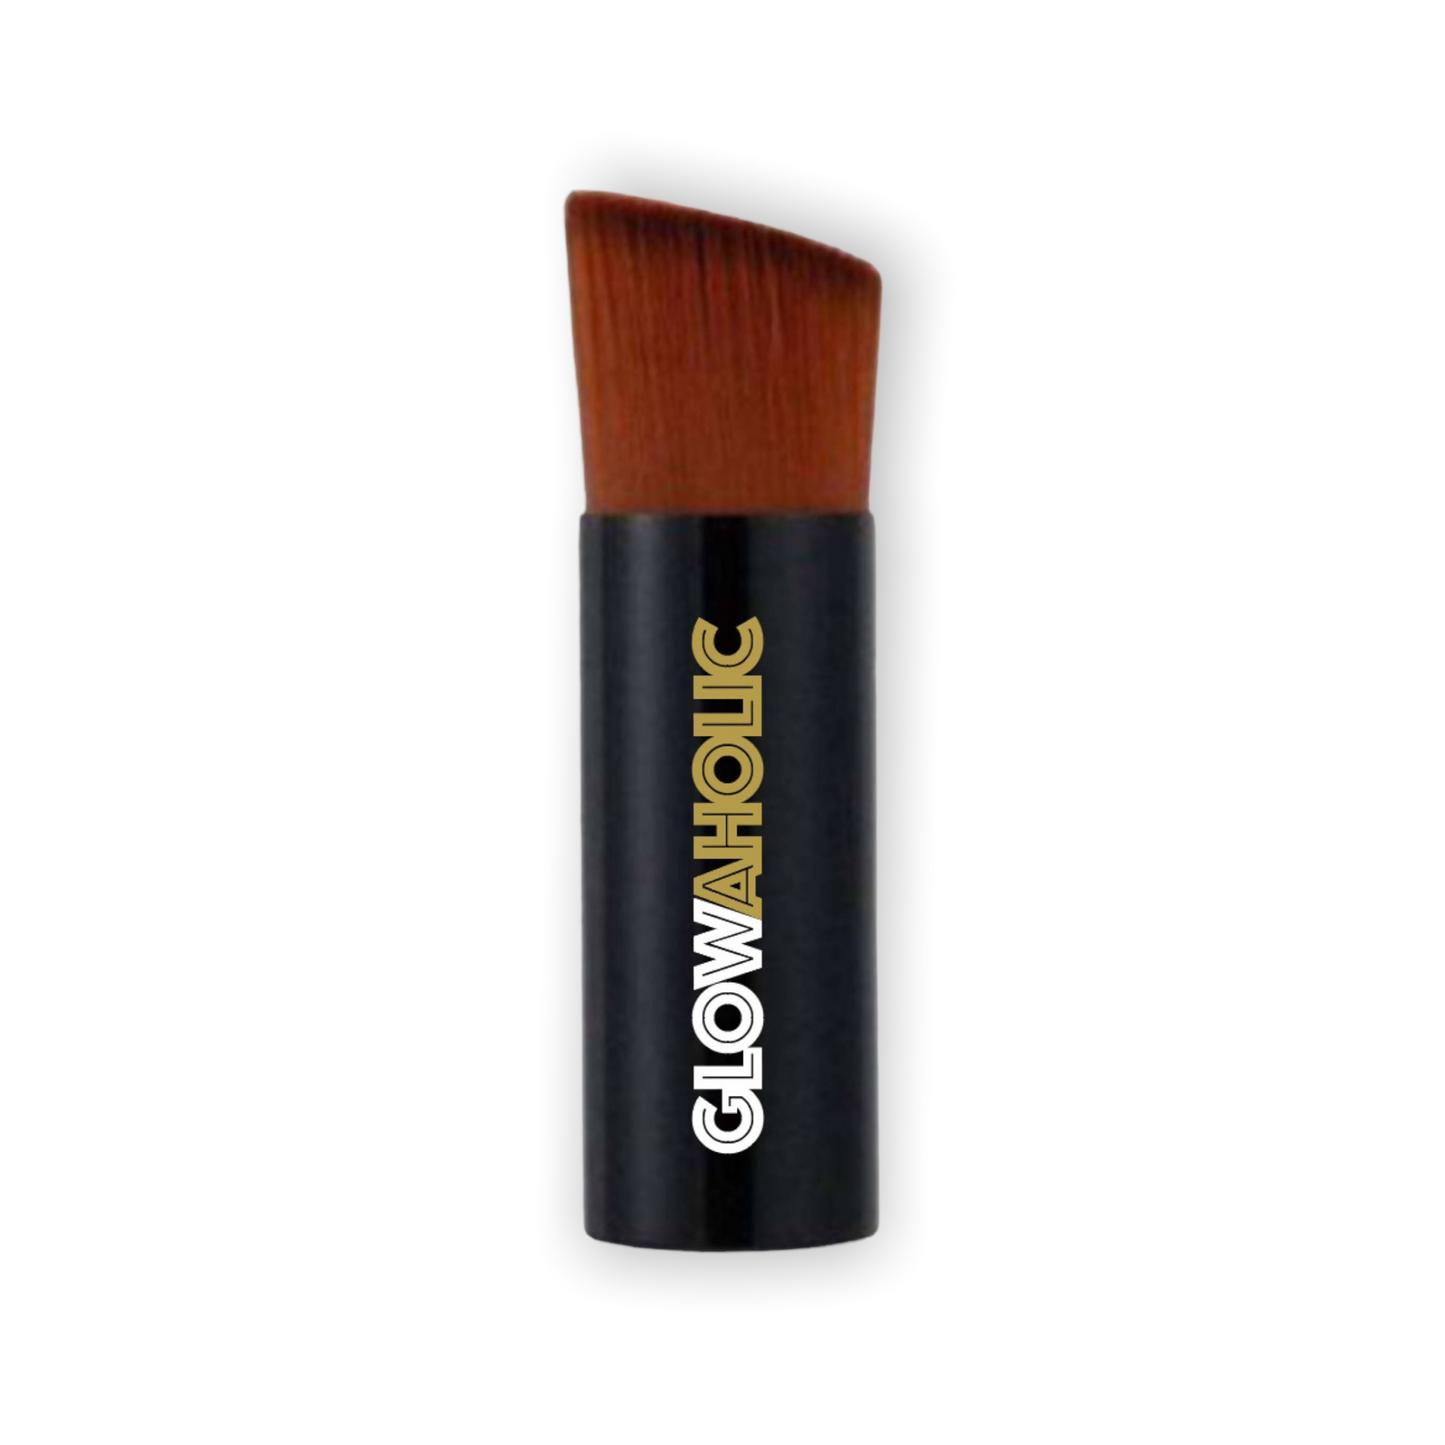 2-in-1 Fluid and Powder Brush